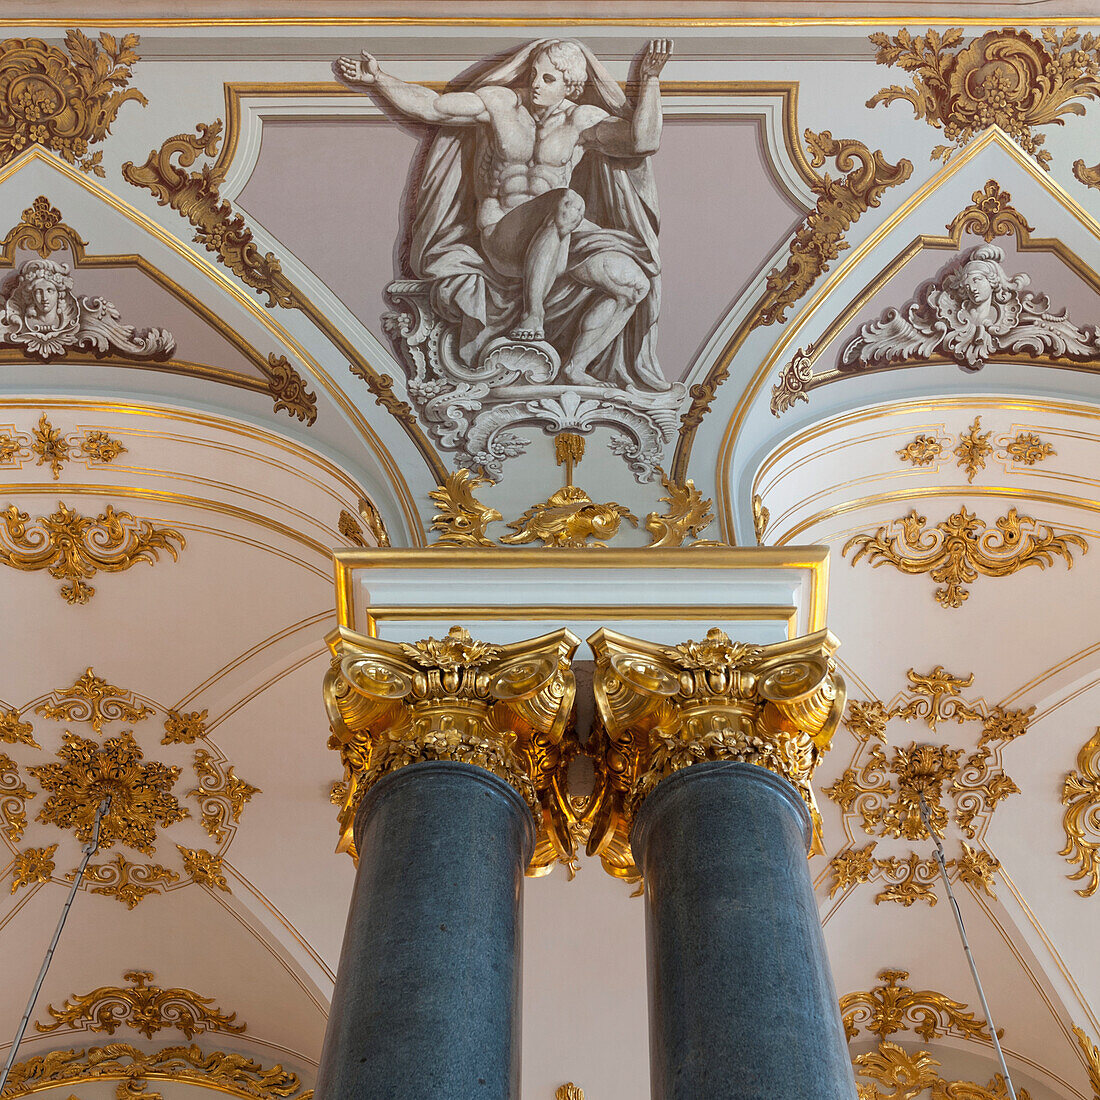 Columns And Sculpture On The Ceiling In Winter Palace; St. Petersburg Russia